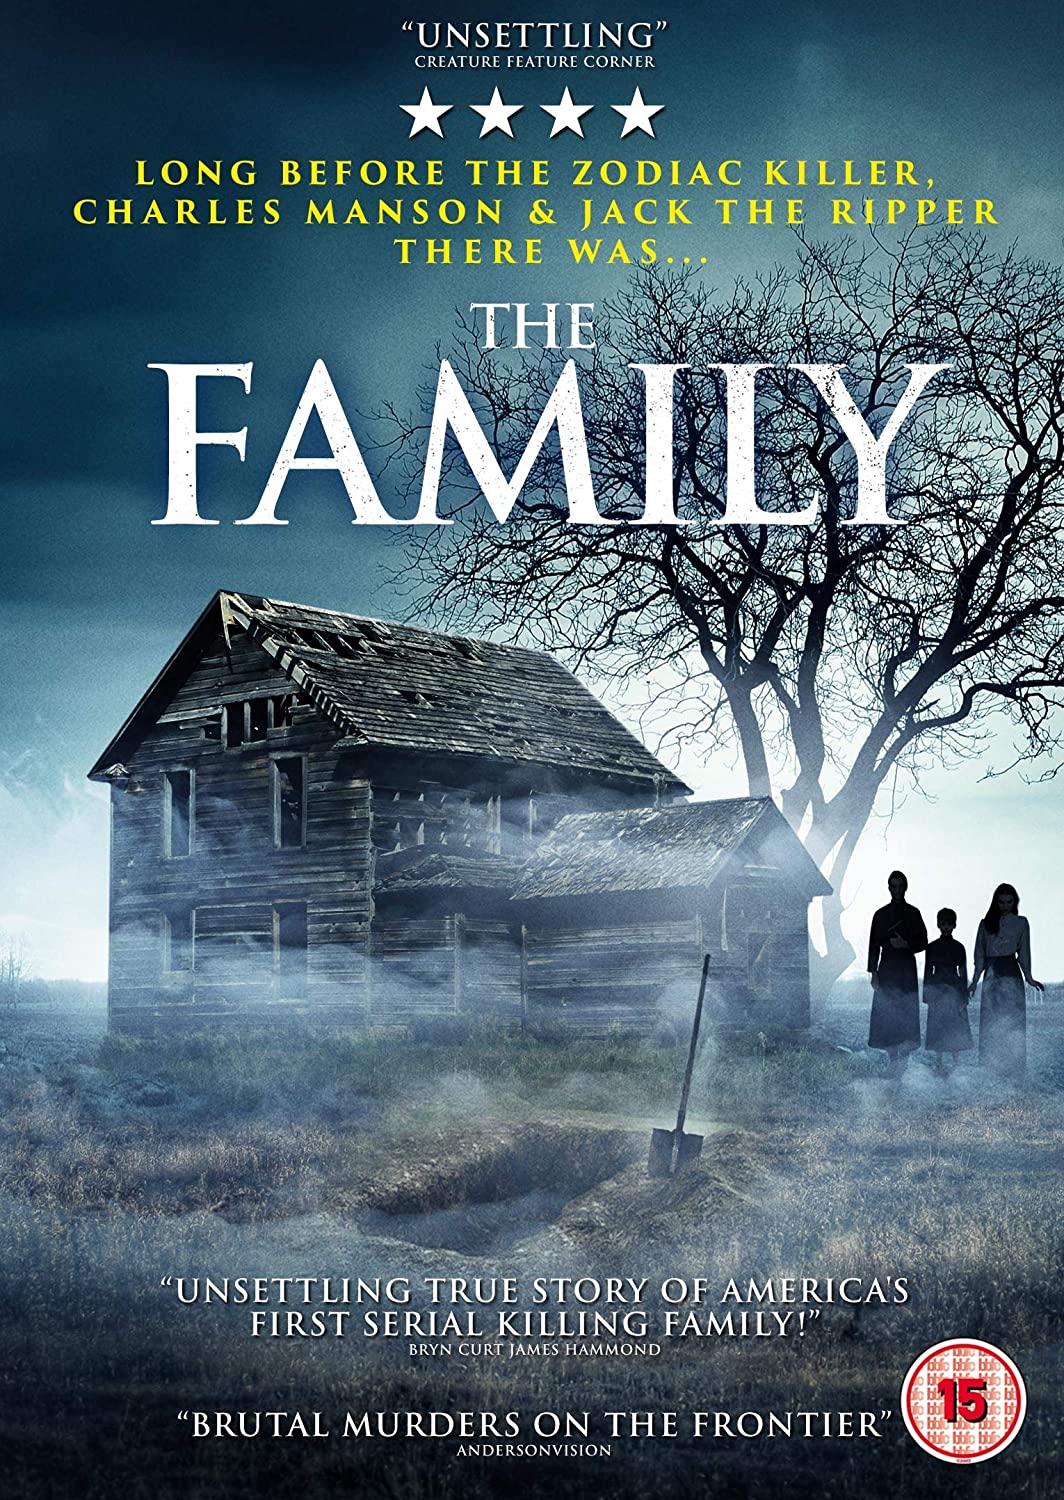 The Family - Action/Comedy [DVD]